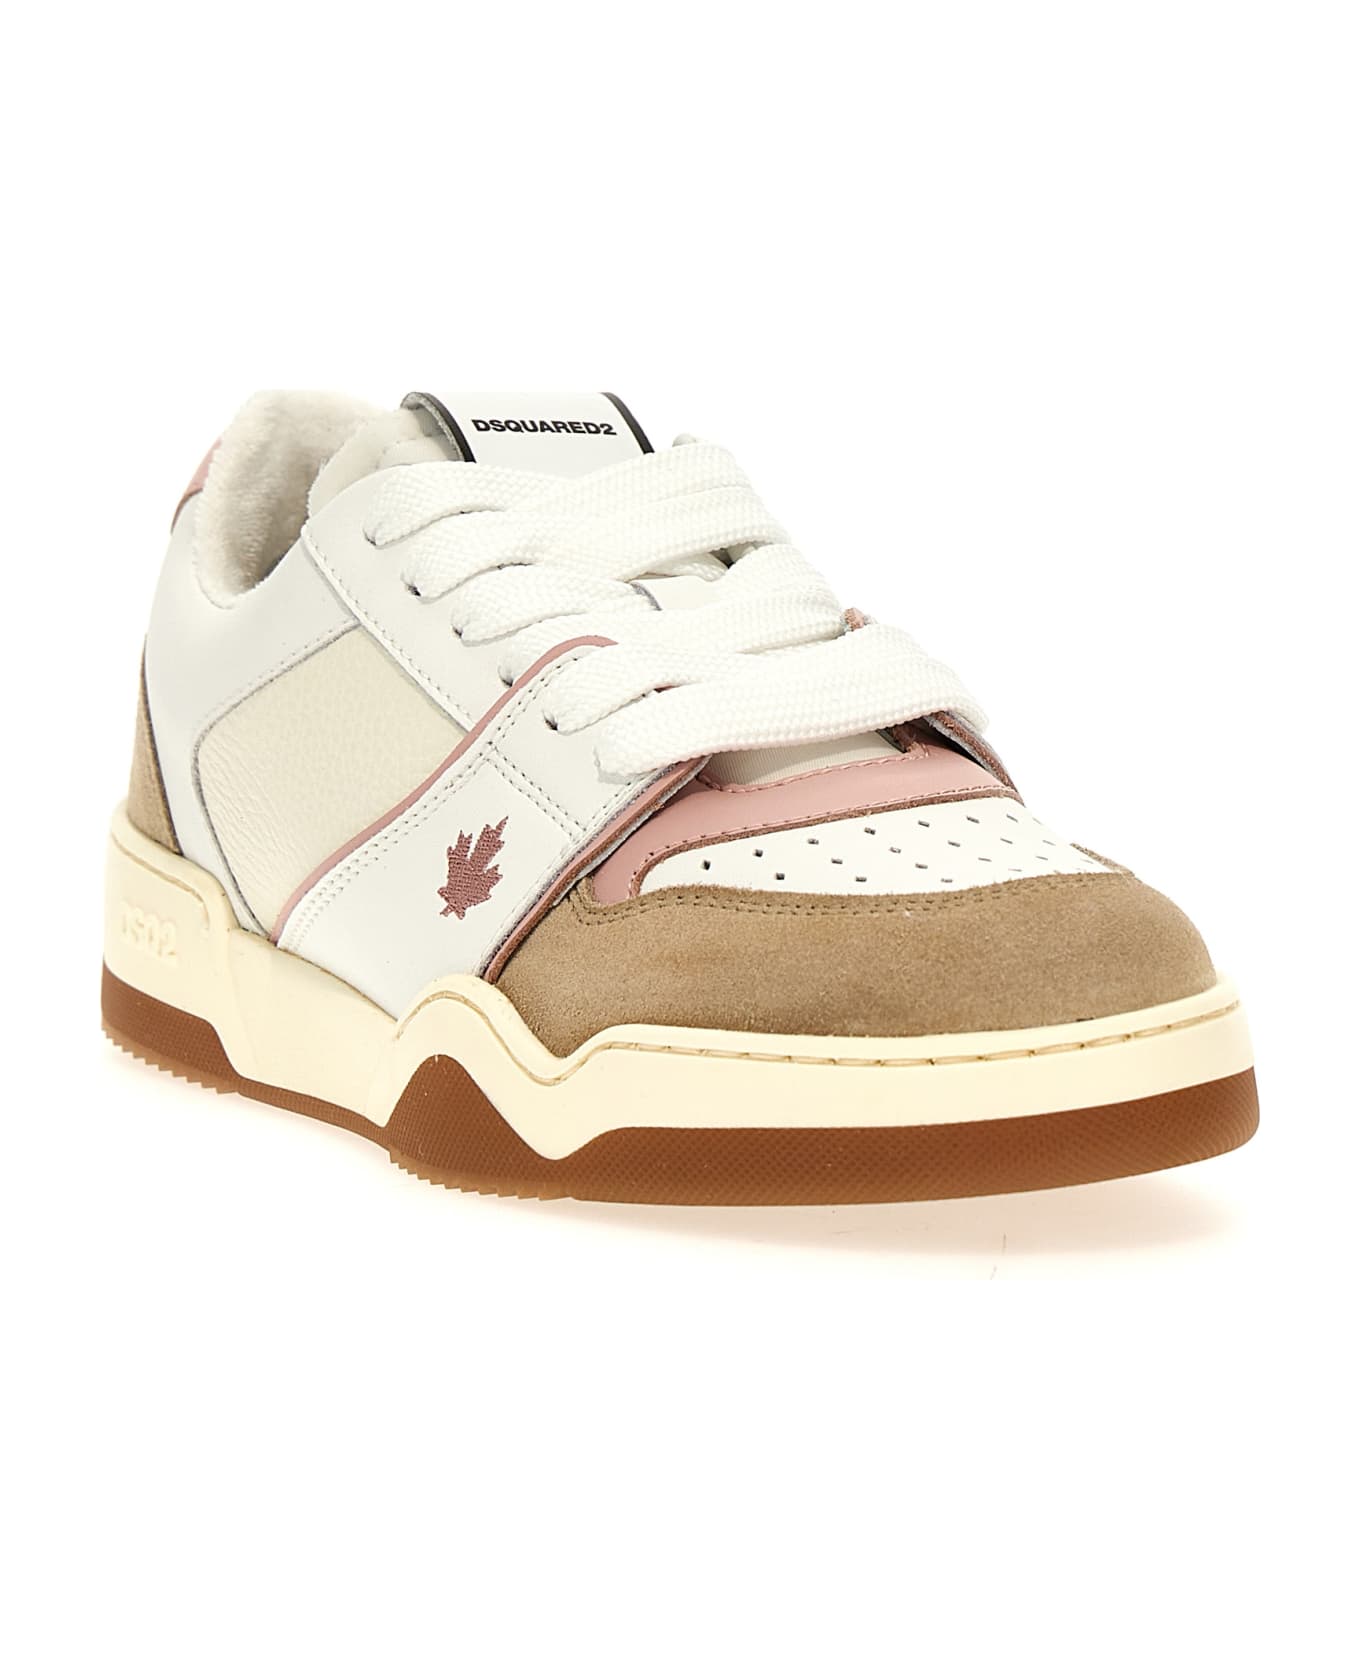 Dsquared2 Leather And Suede Sneakers - WHITE/PINK